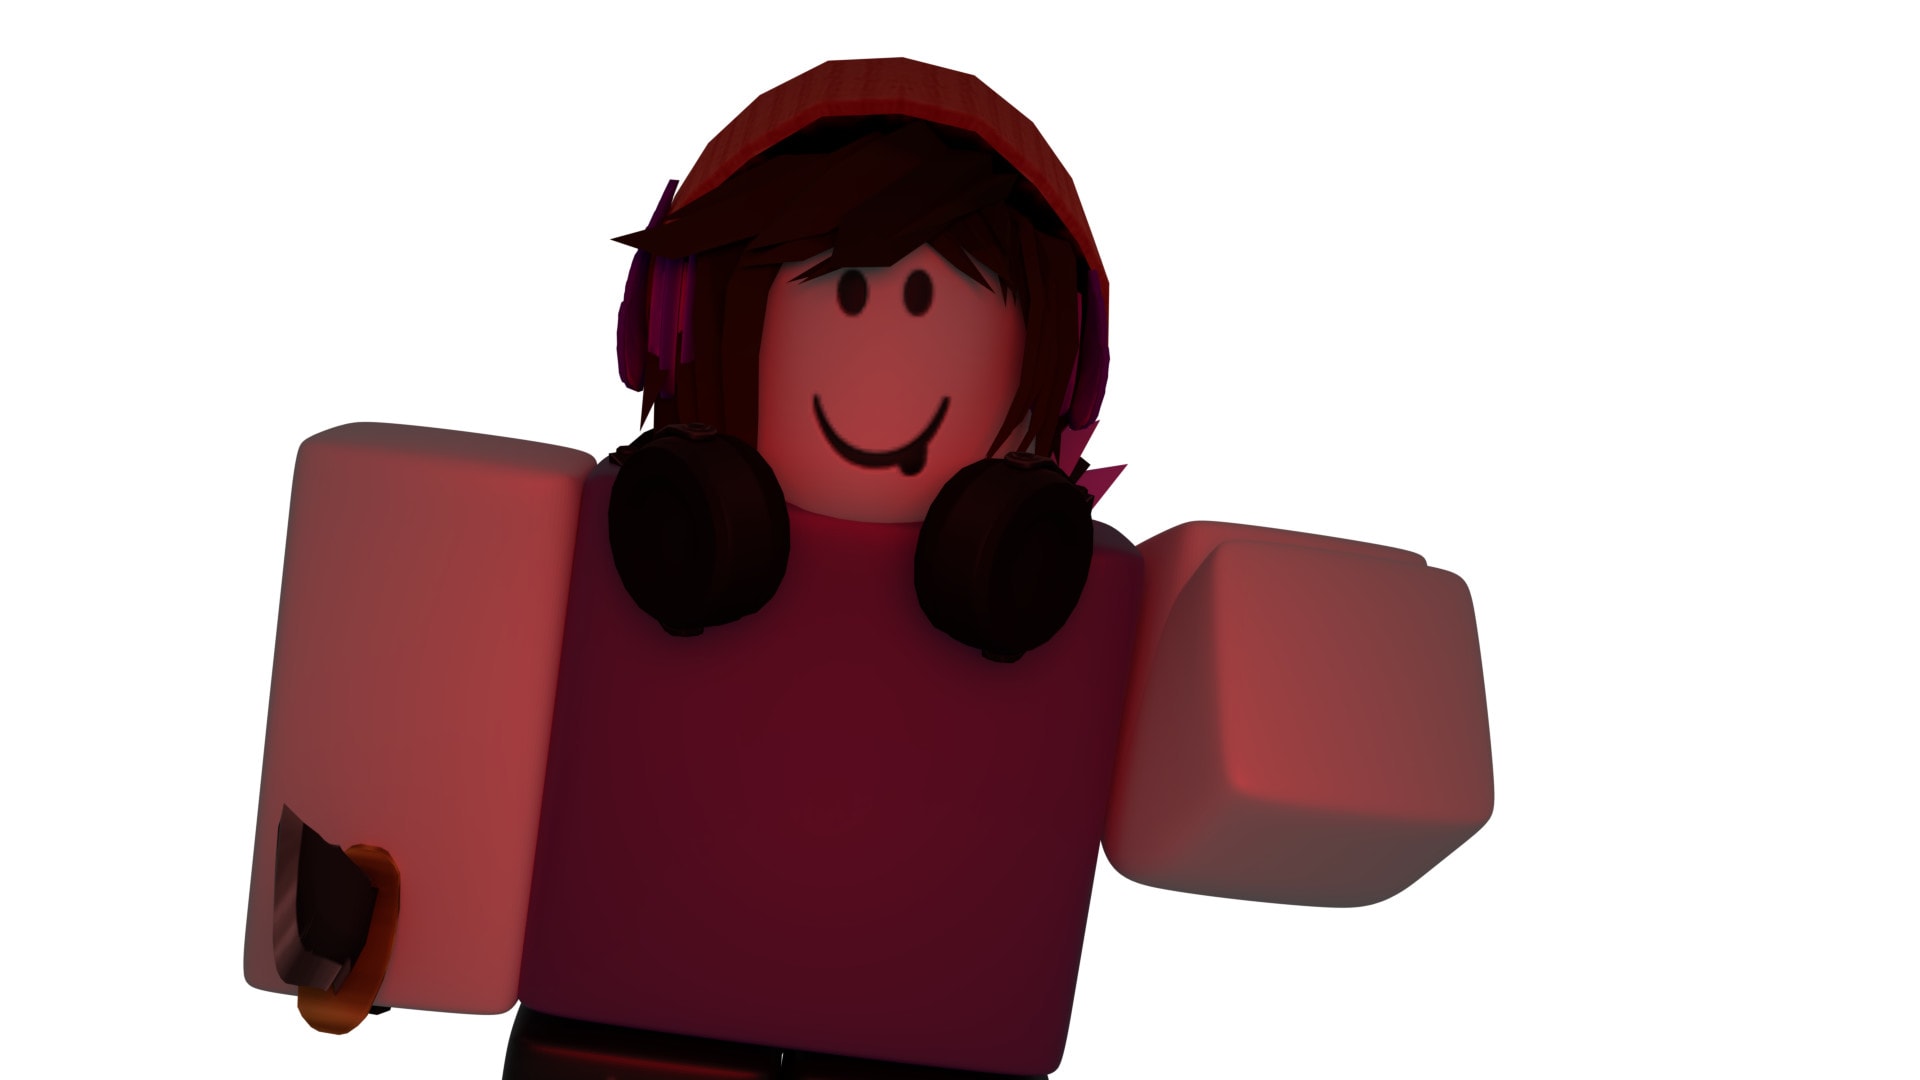 Standard GFX (with background) - Roblox